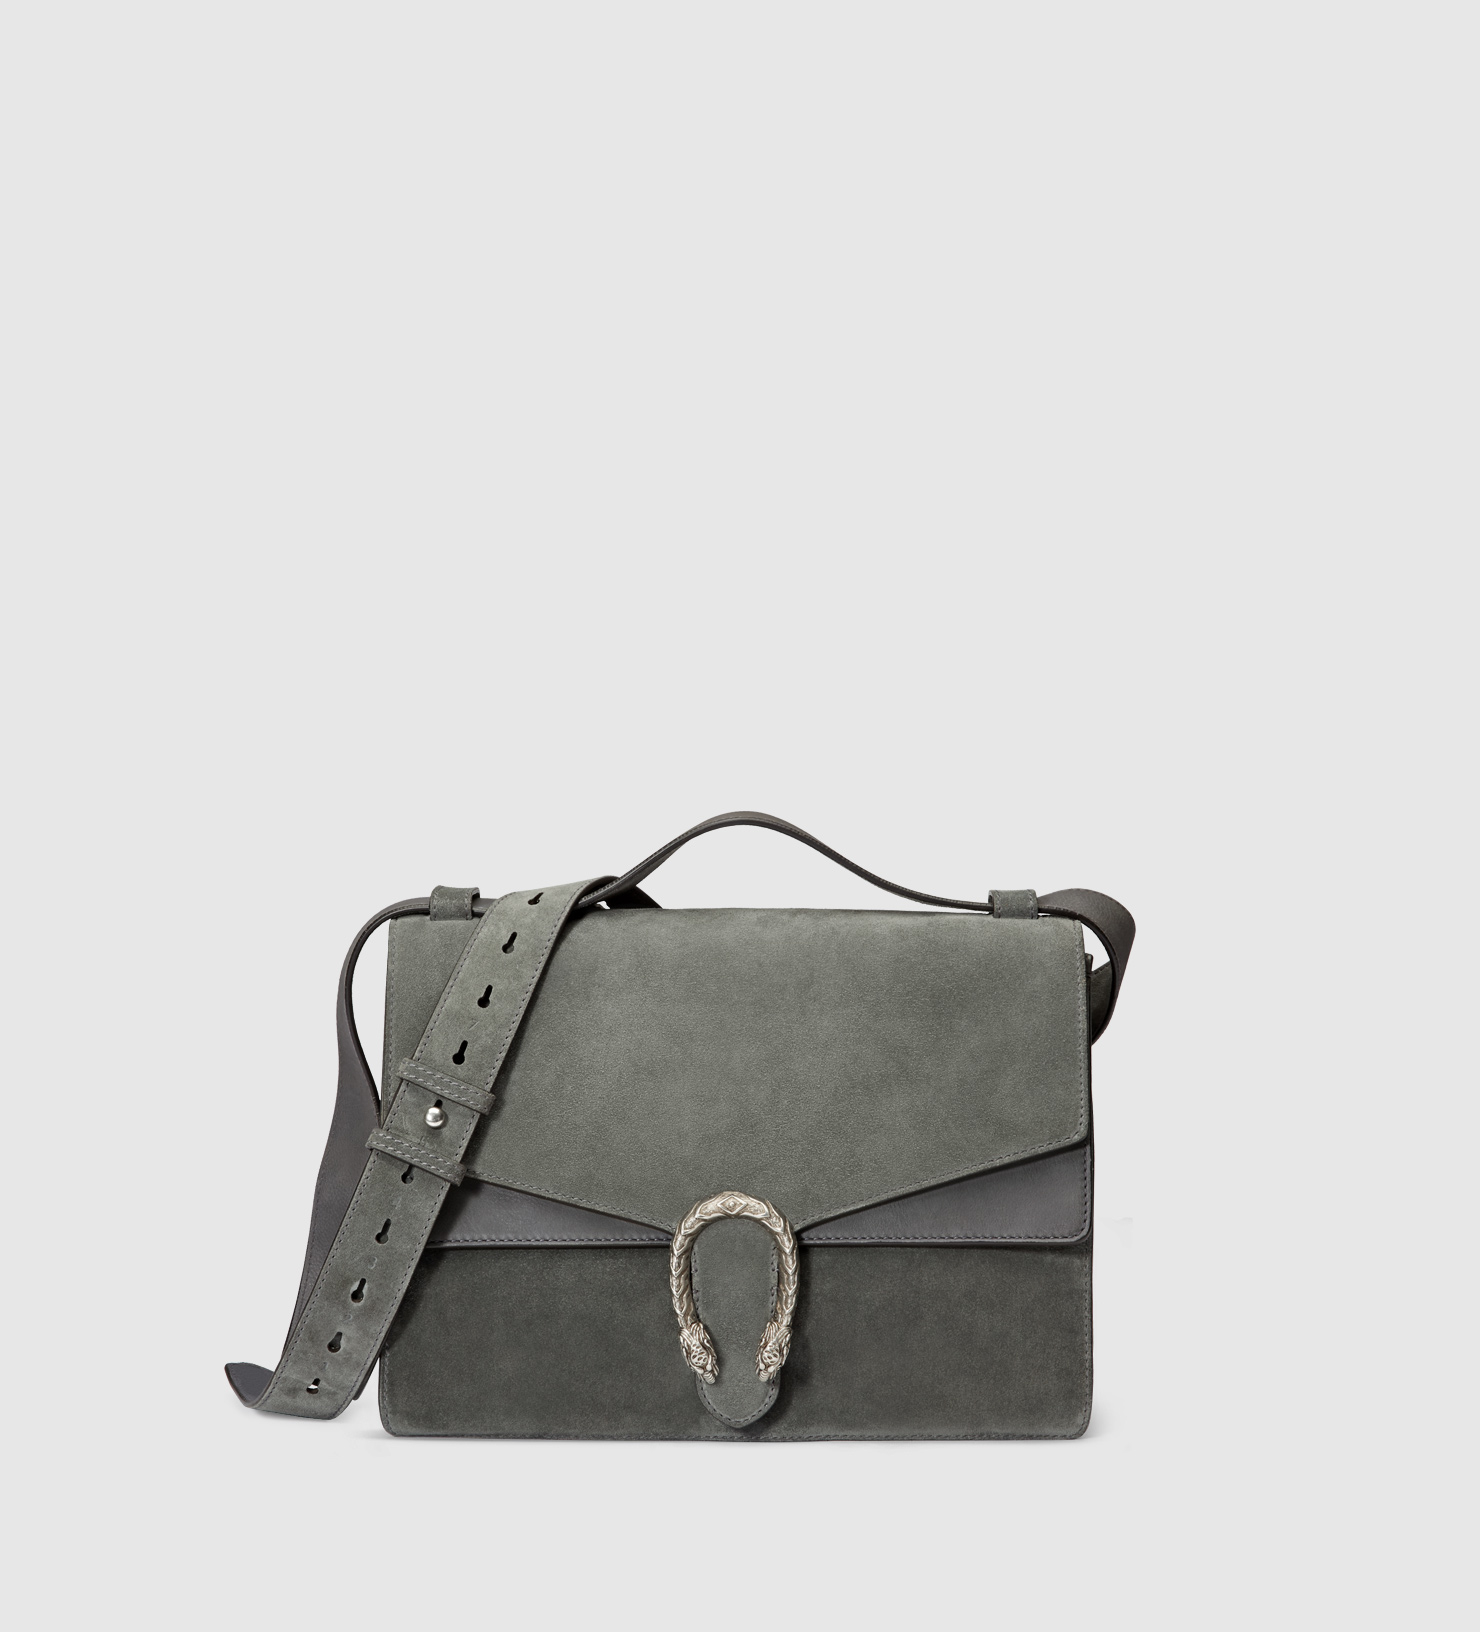 Lyst - Gucci Suede Messenger Bag With Tiger Head in Gray for Men